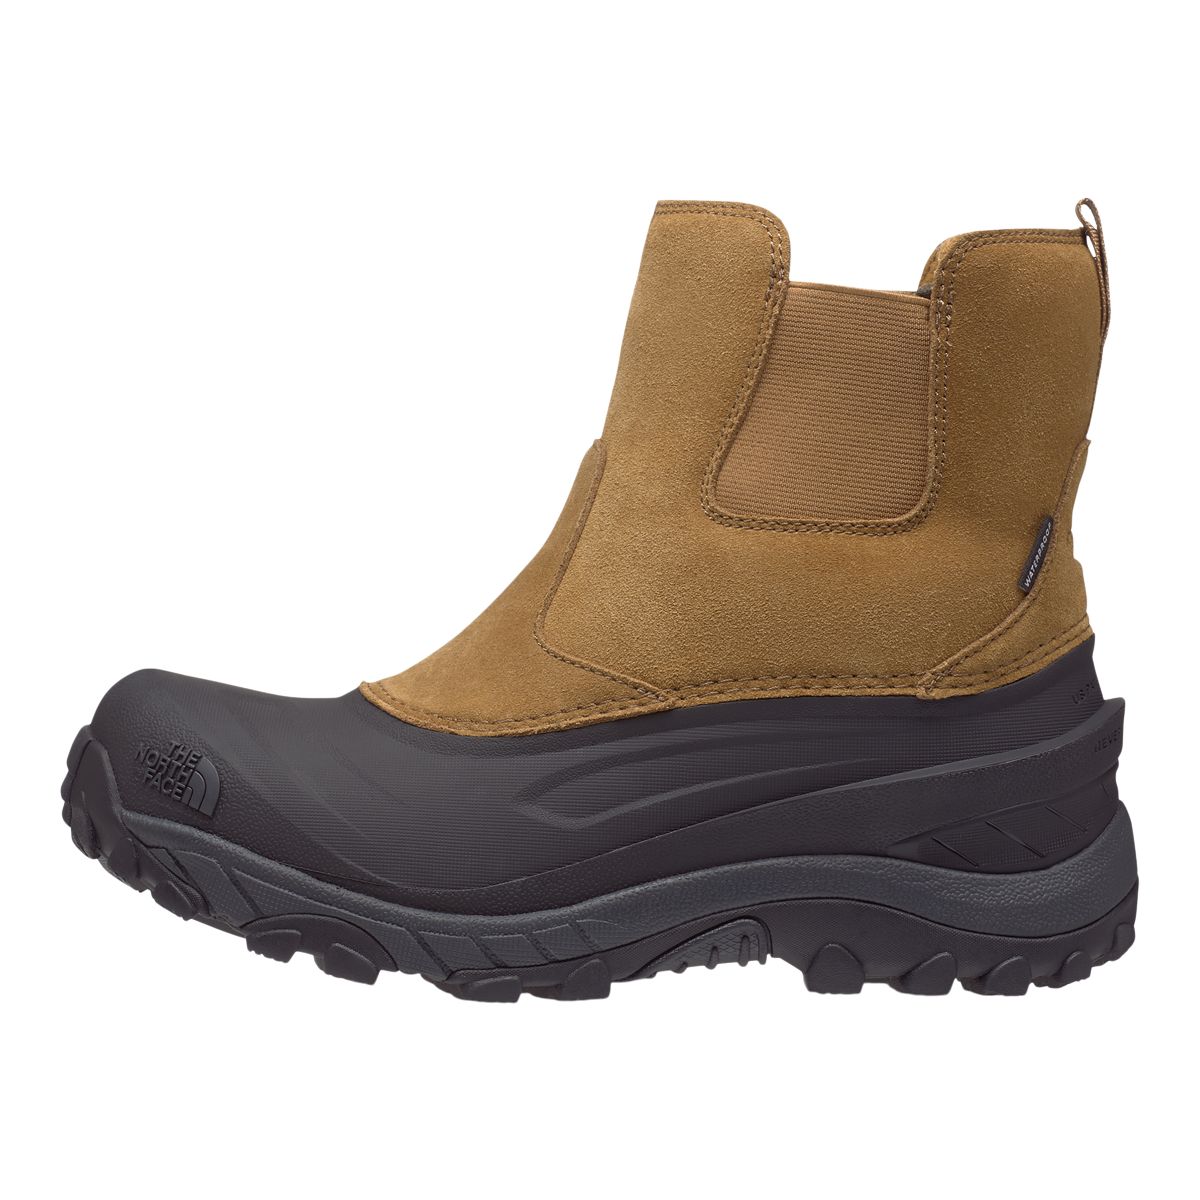 The North Face Men's Chilkat IV Winter Boots, Slip On, Waterproof ...